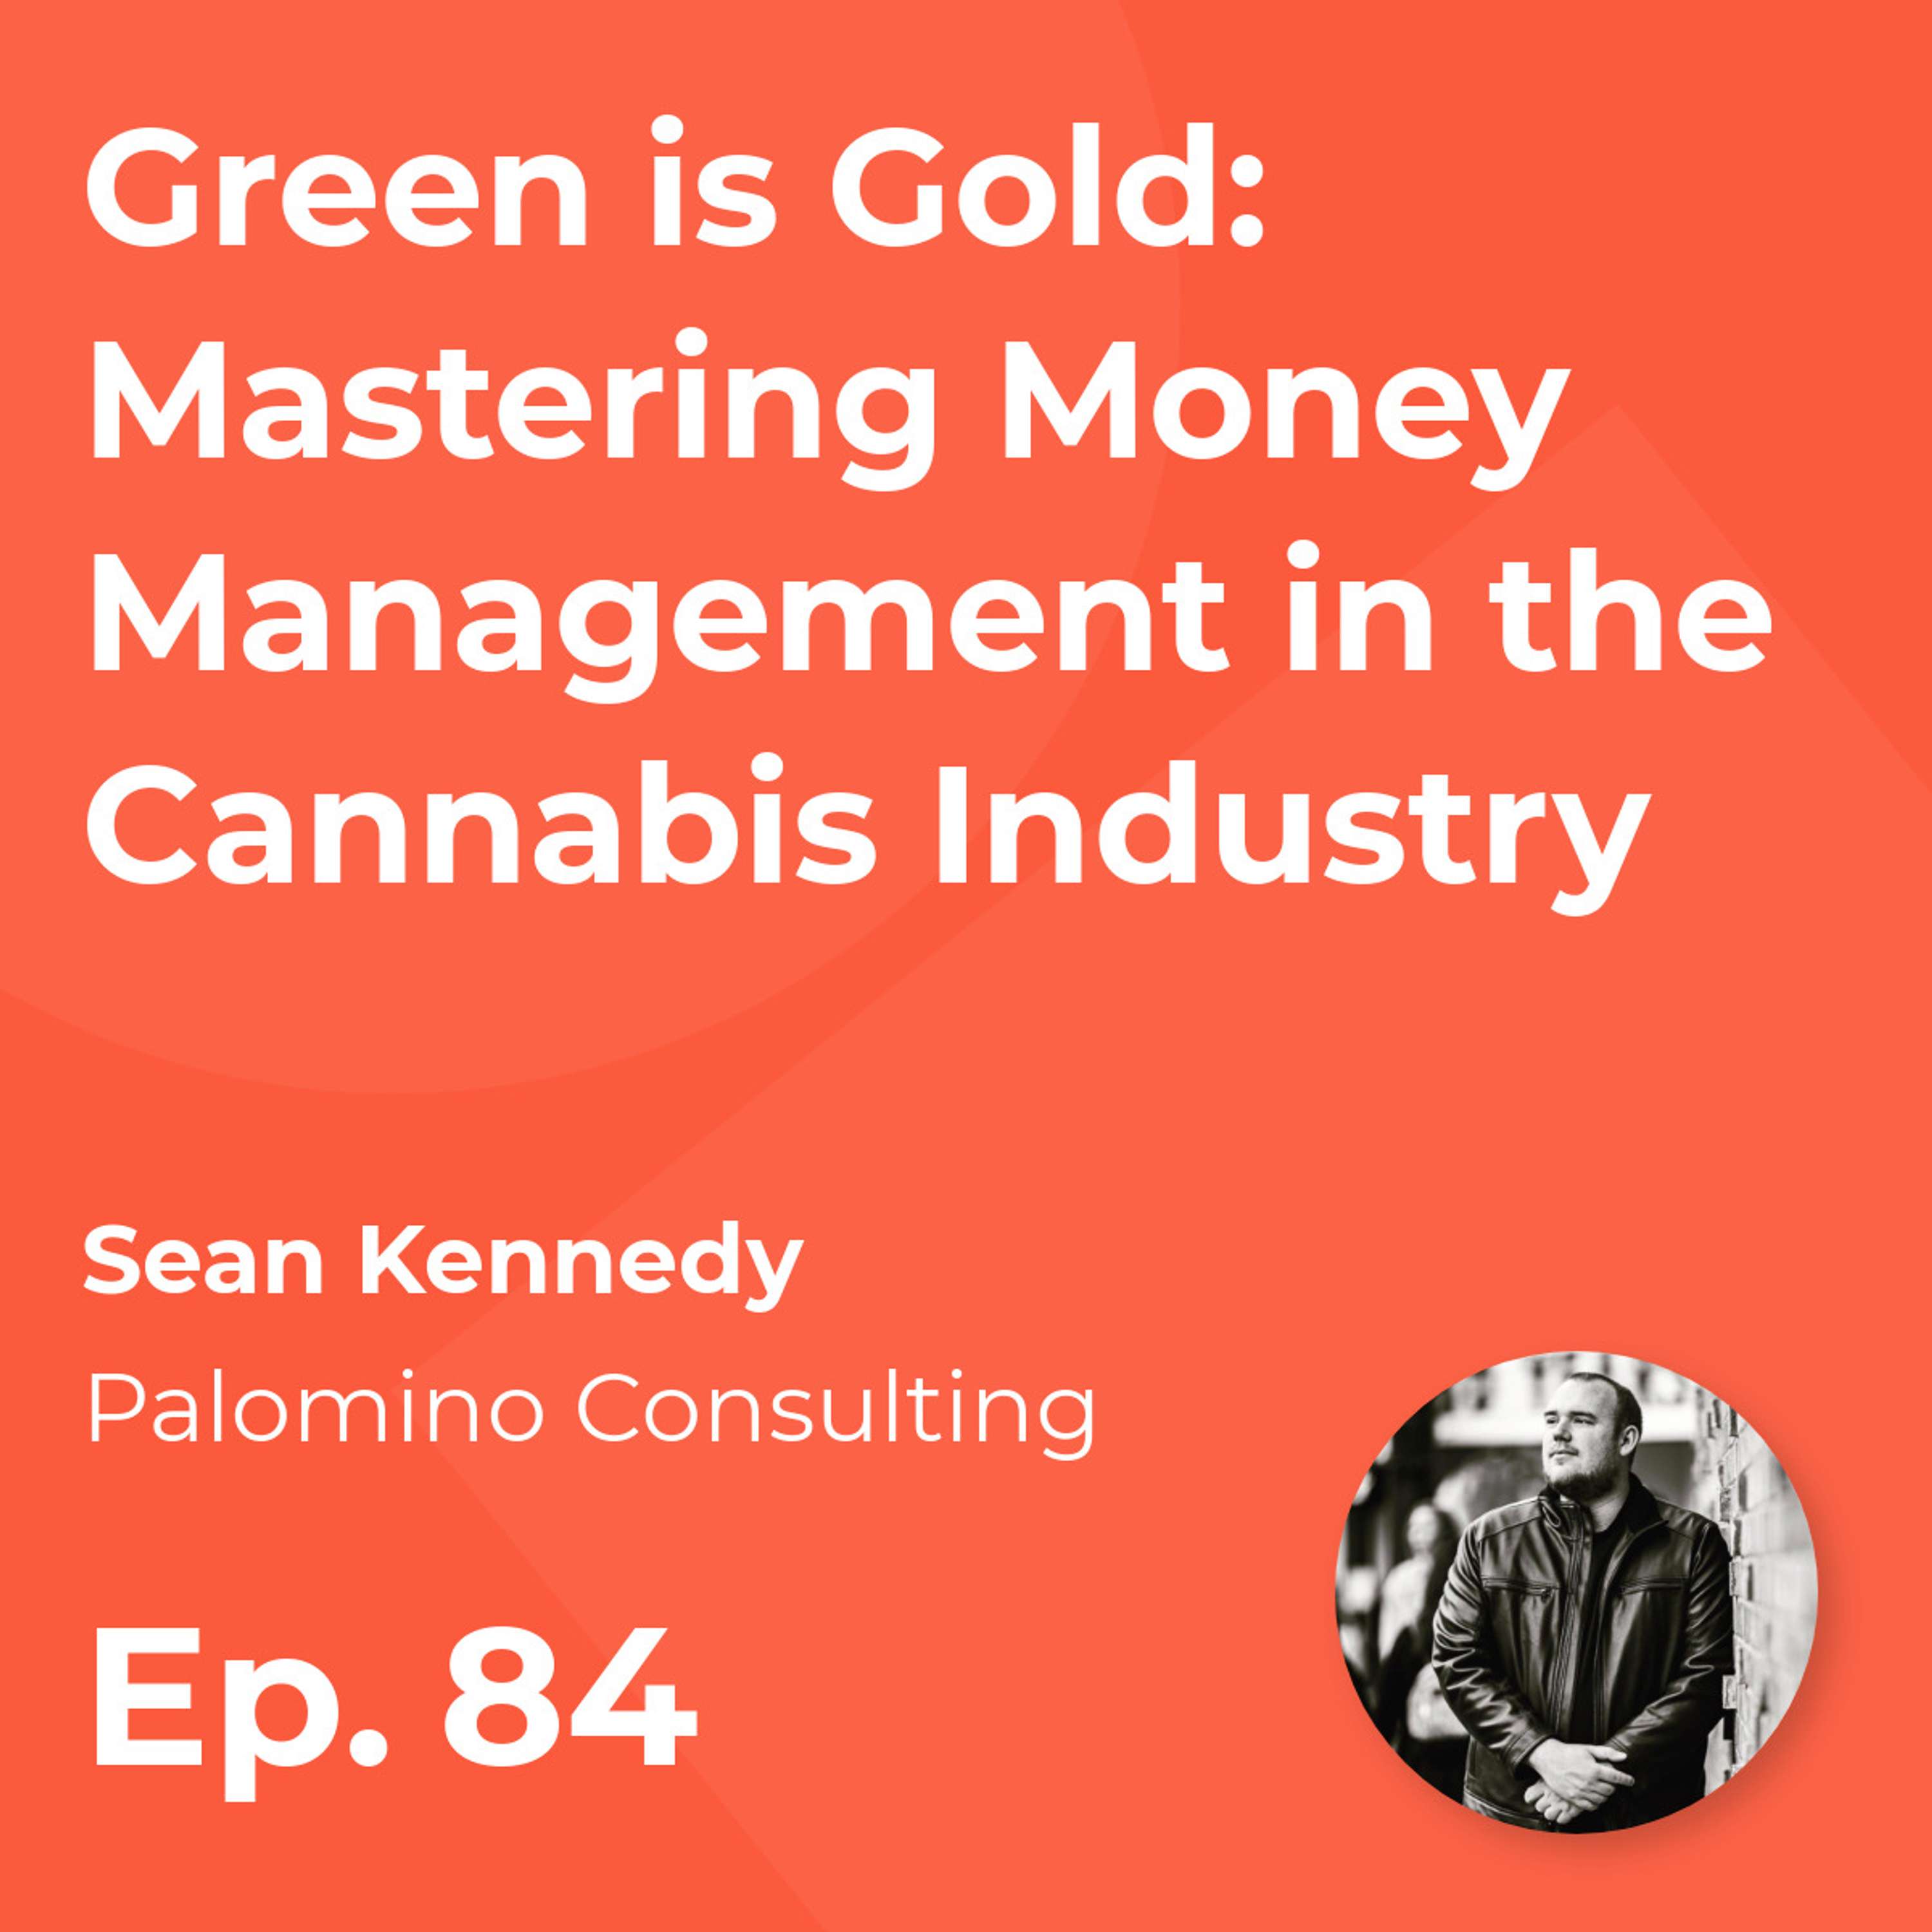 Green is Gold: Mastering Money Management in the Cannabis Industry - Live Episode